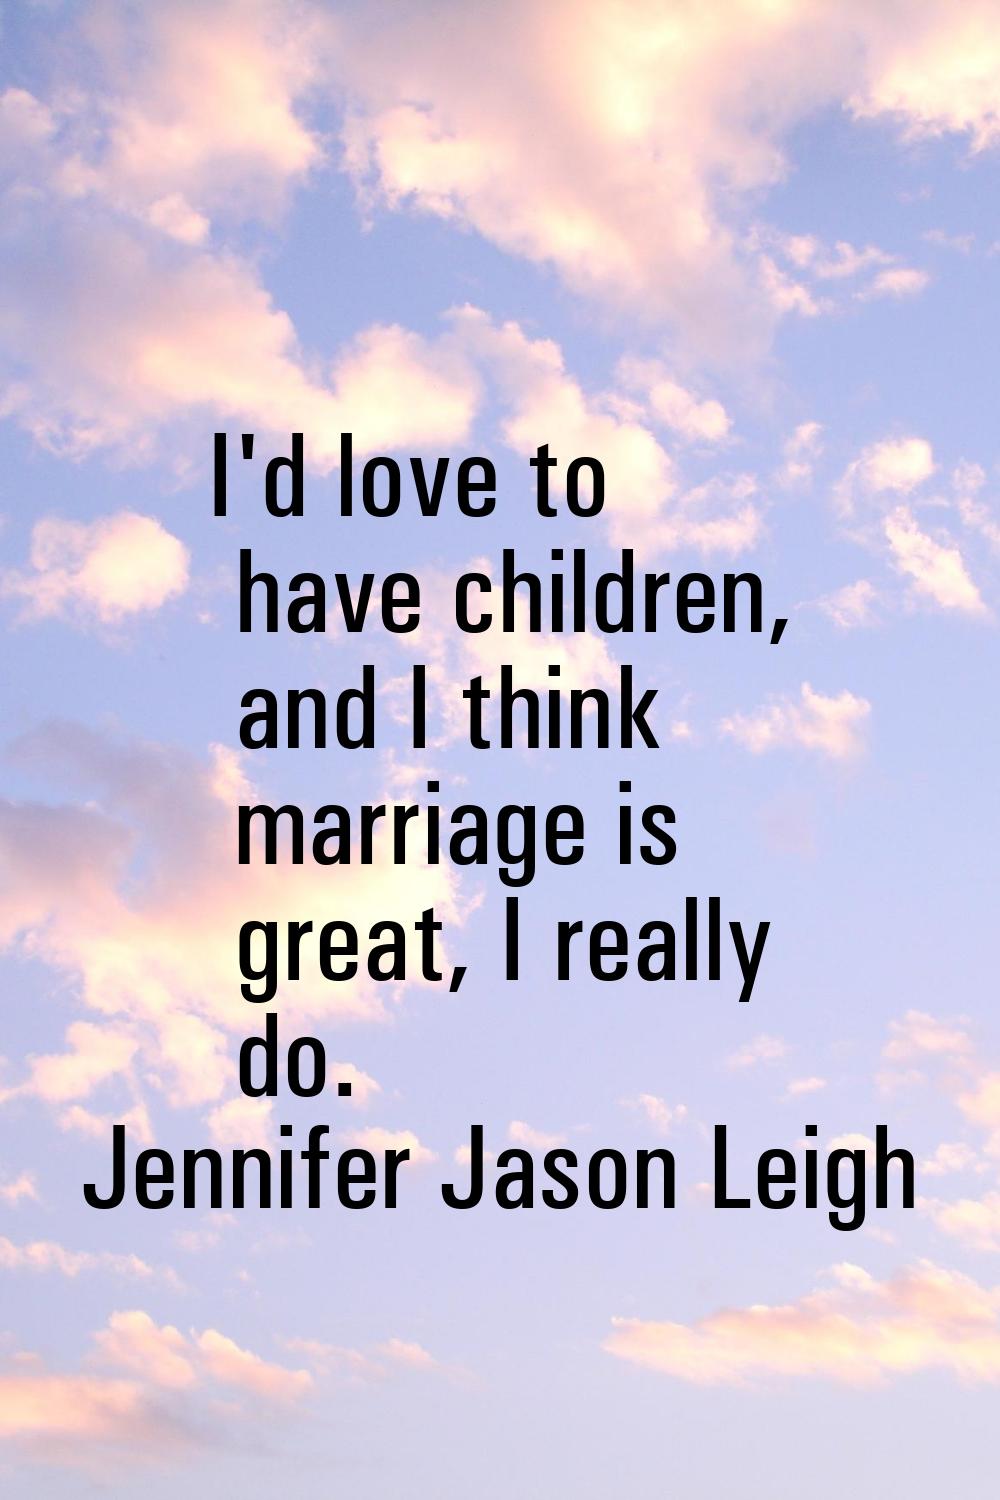 I'd love to have children, and I think marriage is great, I really do.